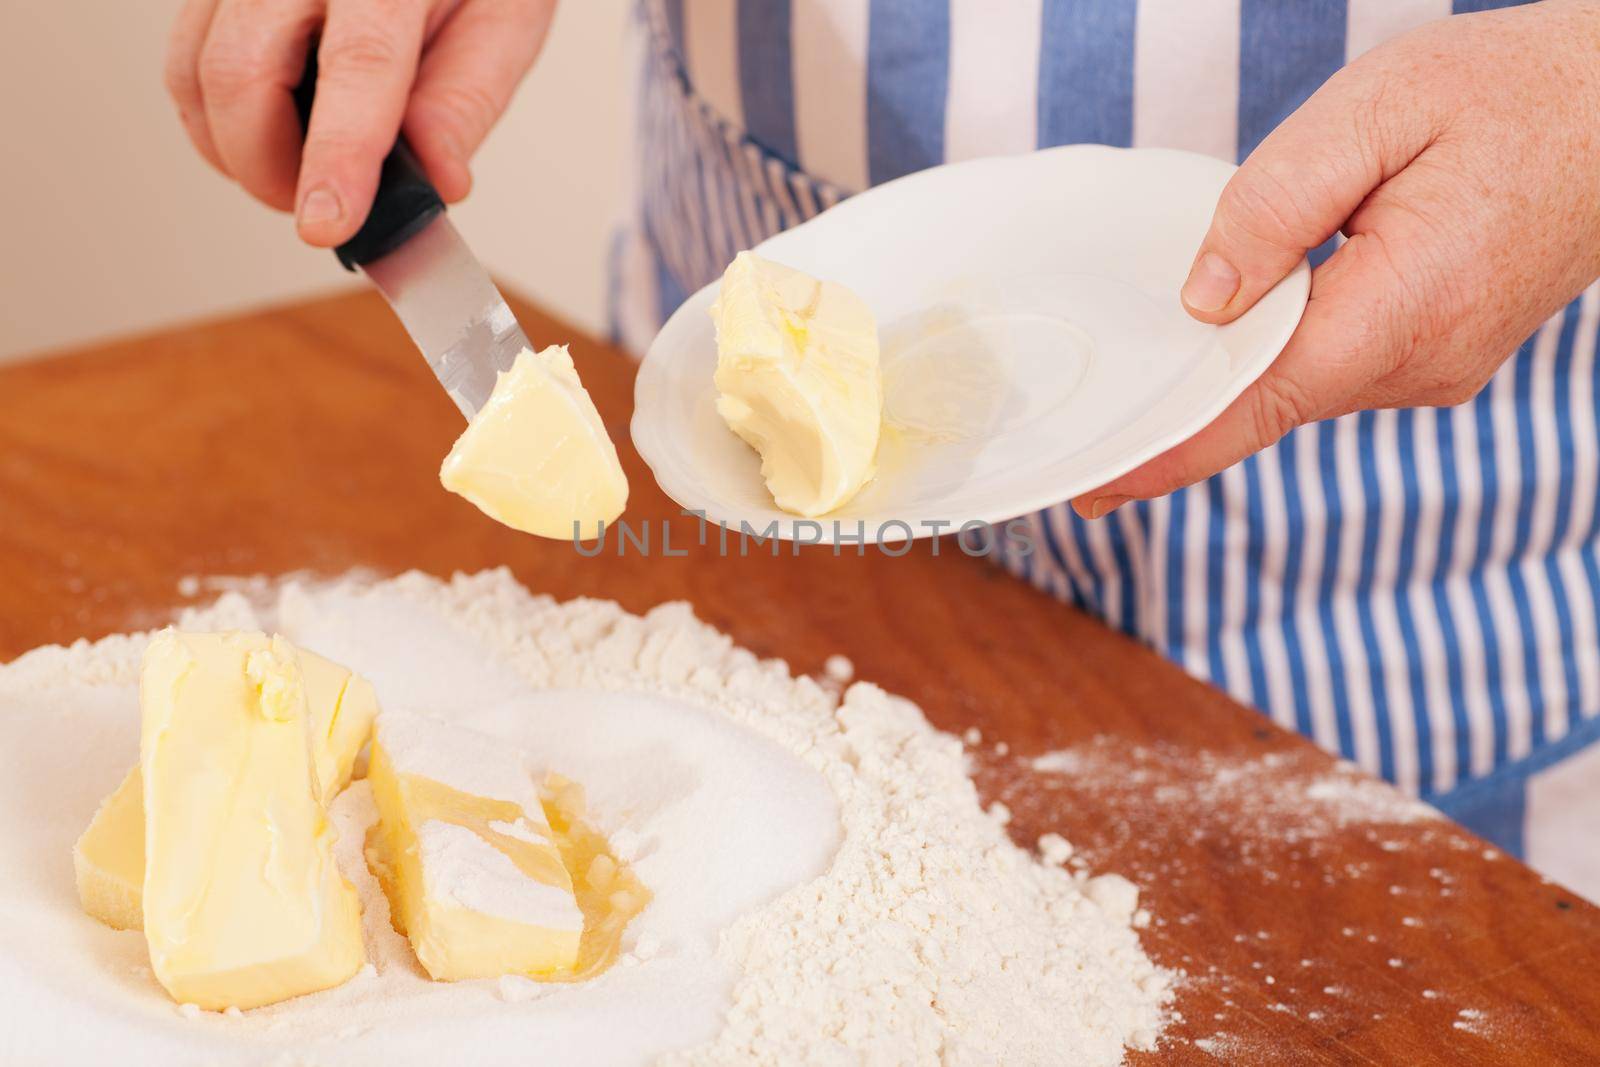 Baking biscuits, woman putting butter in the flour